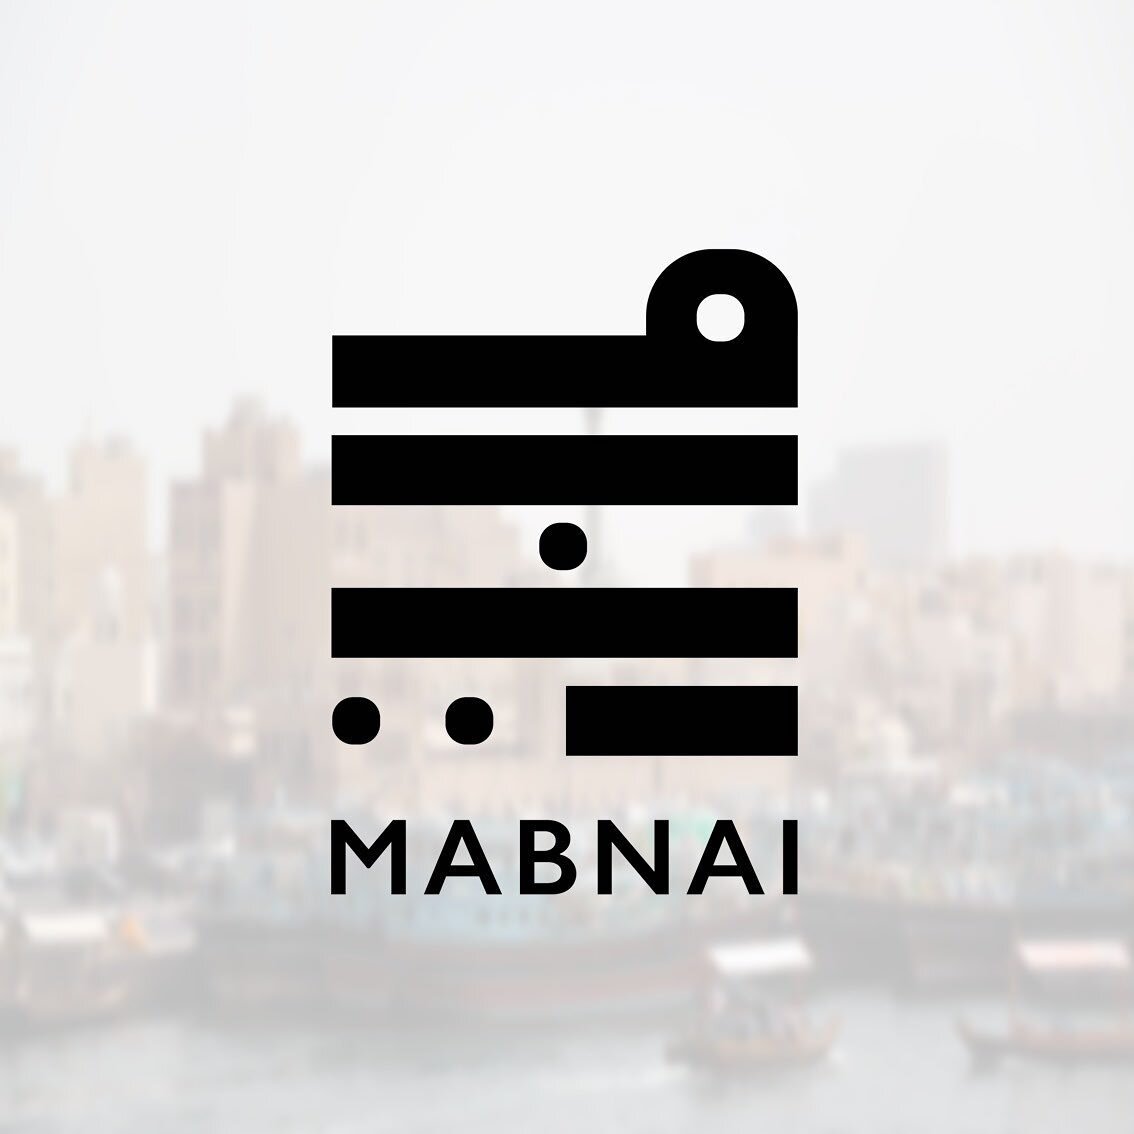 MABNAI aims to educate on positive practices of the built environment (e.g., architecture, urban planning/design, archival history) via public engagement projects (e.g., exhibitions, research initiatives, symposiums)